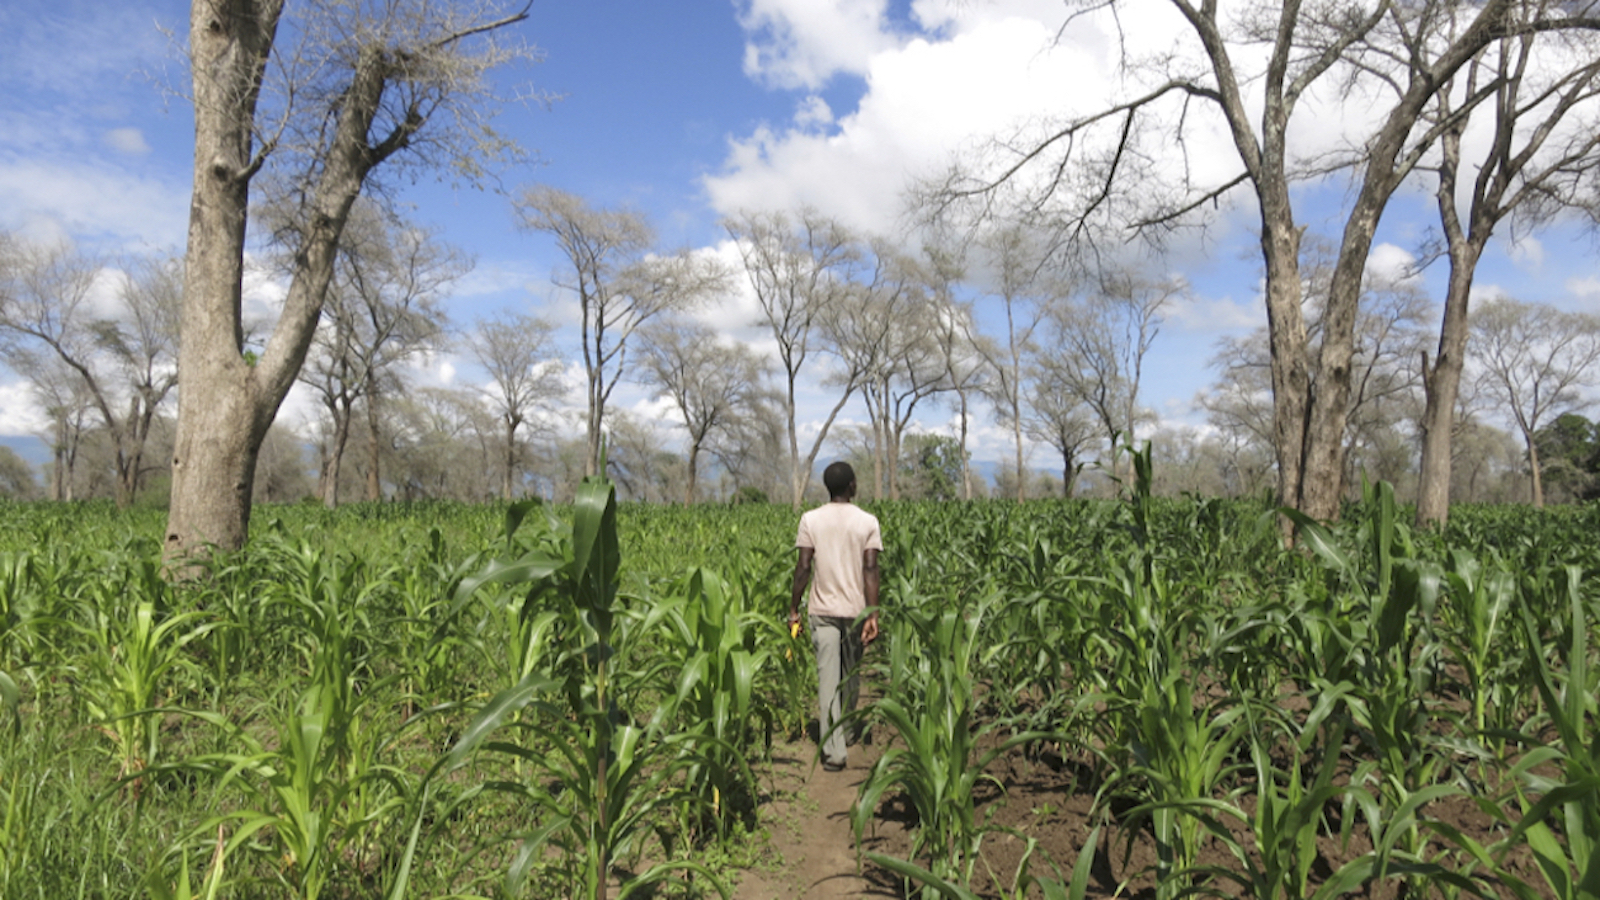 Enlarged view: Maize fields in central Malawi (Image: Janina Dierks)